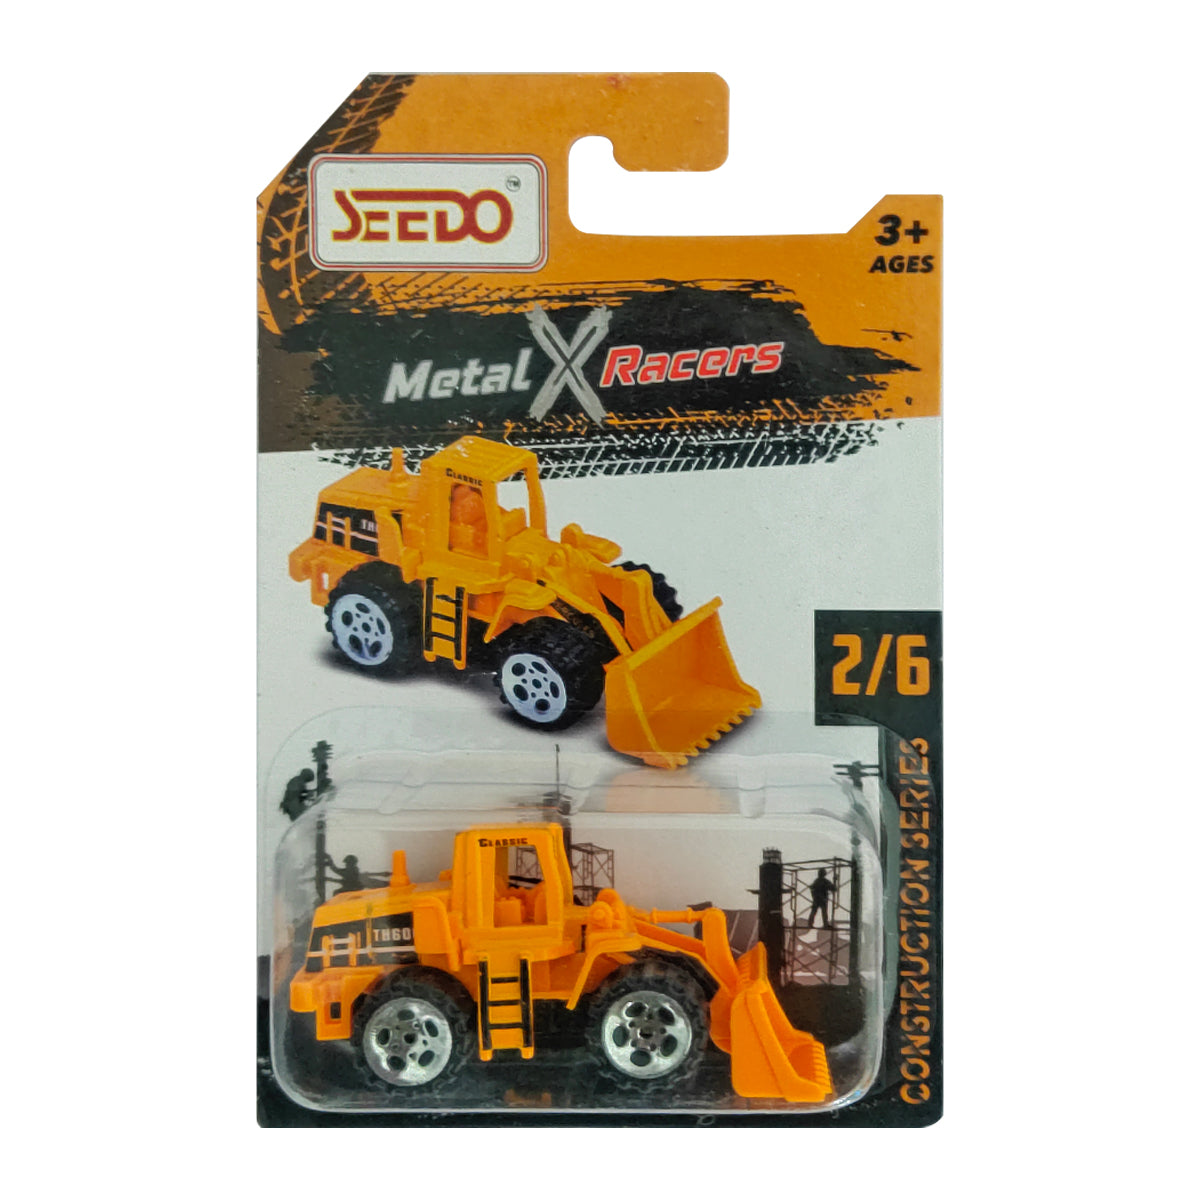 Seedo Metal X Racers Construction Series Die Cast Car for Ages 3+, Pack Of 6